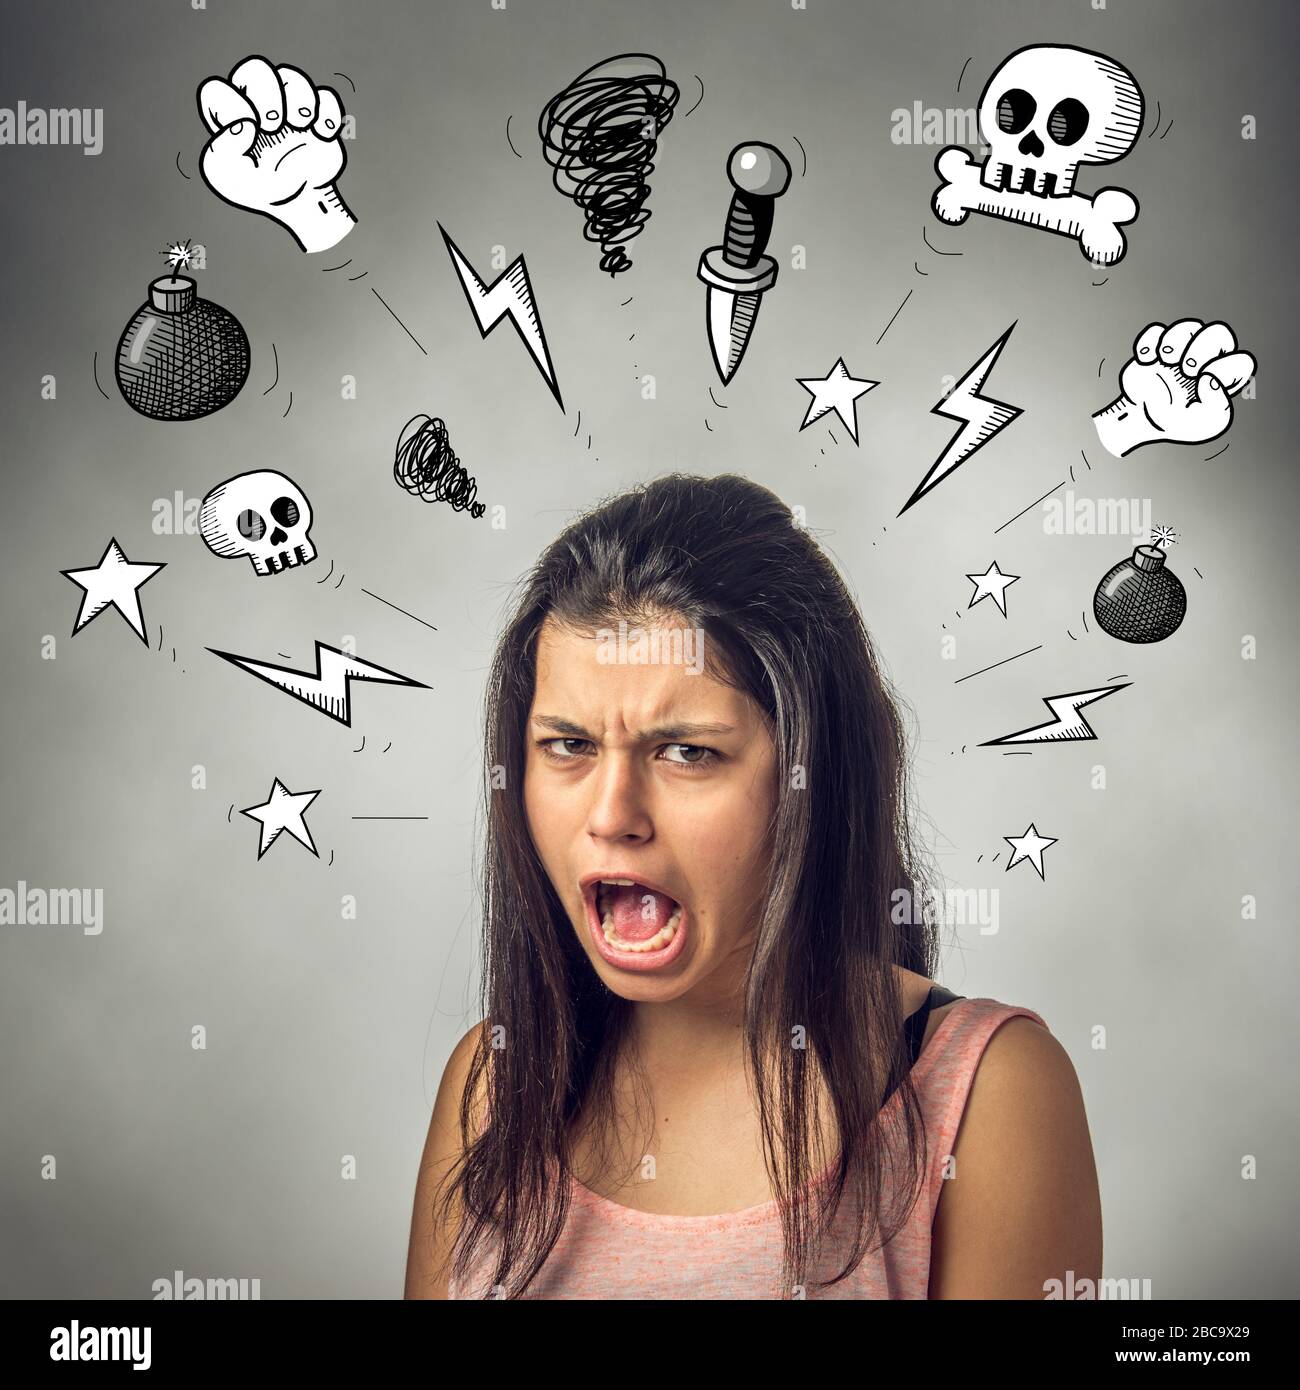 Angry teenager girl with furious expression screaming and swearing Stock Photo